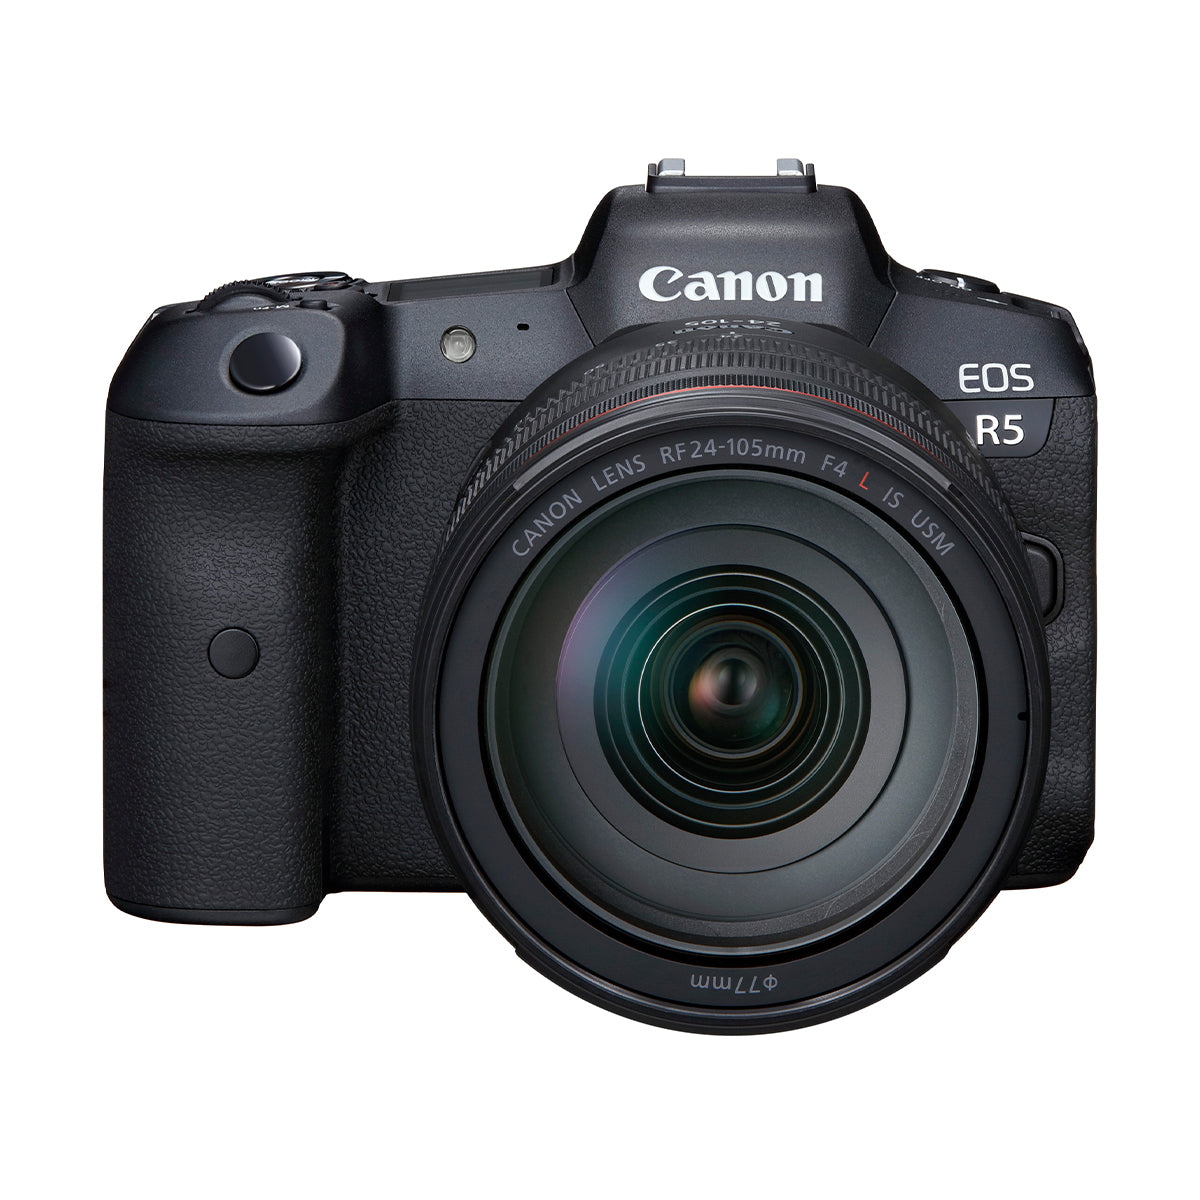 Canon EOS R5 Mirrorless Camera with RF 24-105mm f4L IS USM Lens